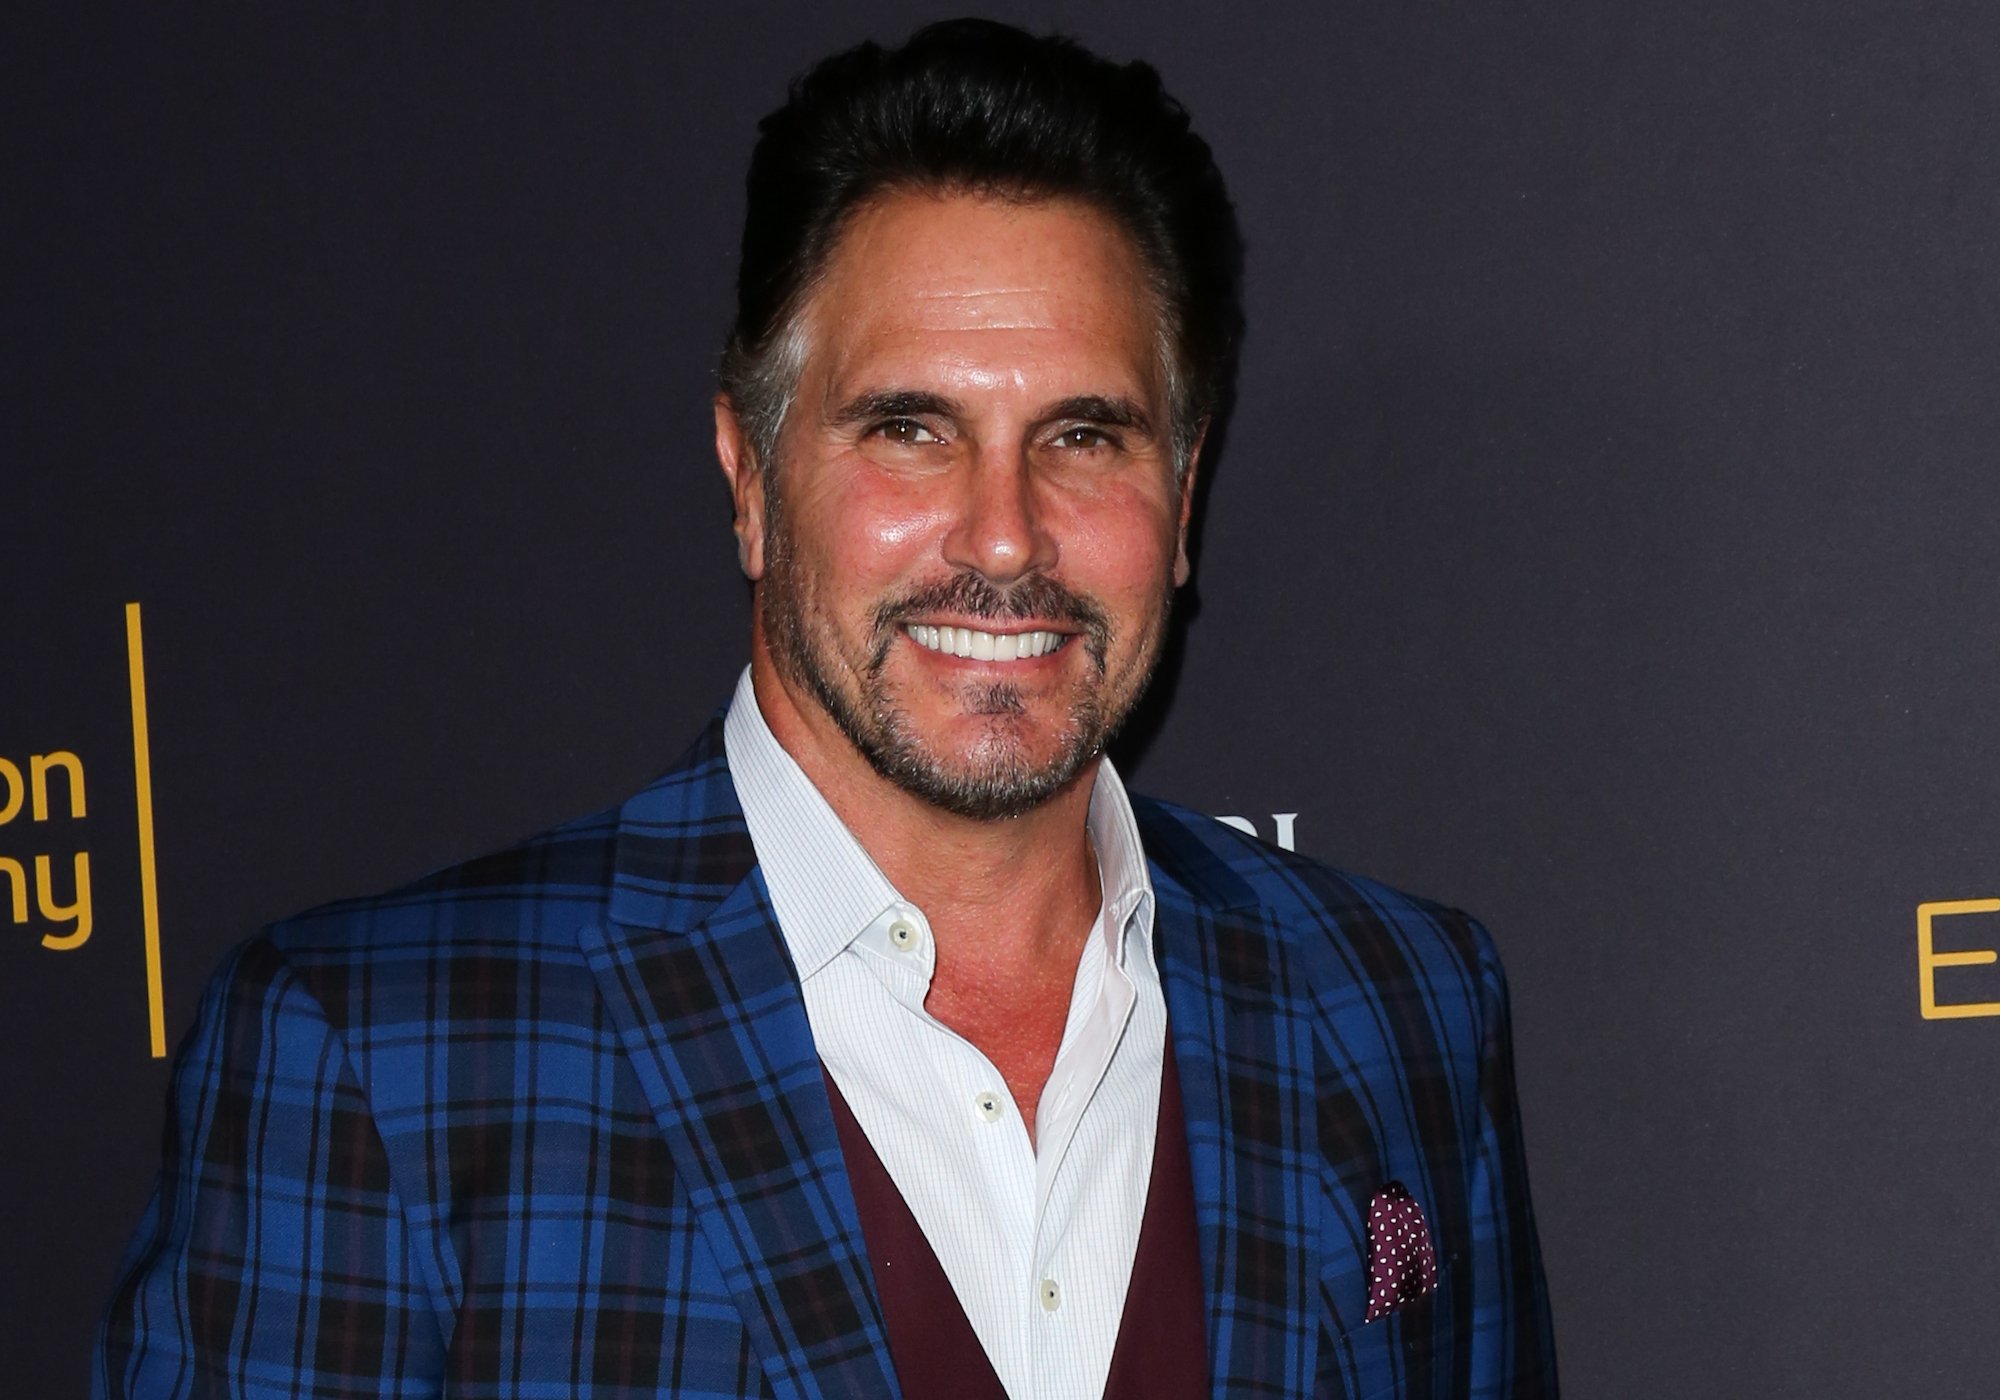 Don Diamont smiling in front of a dark background